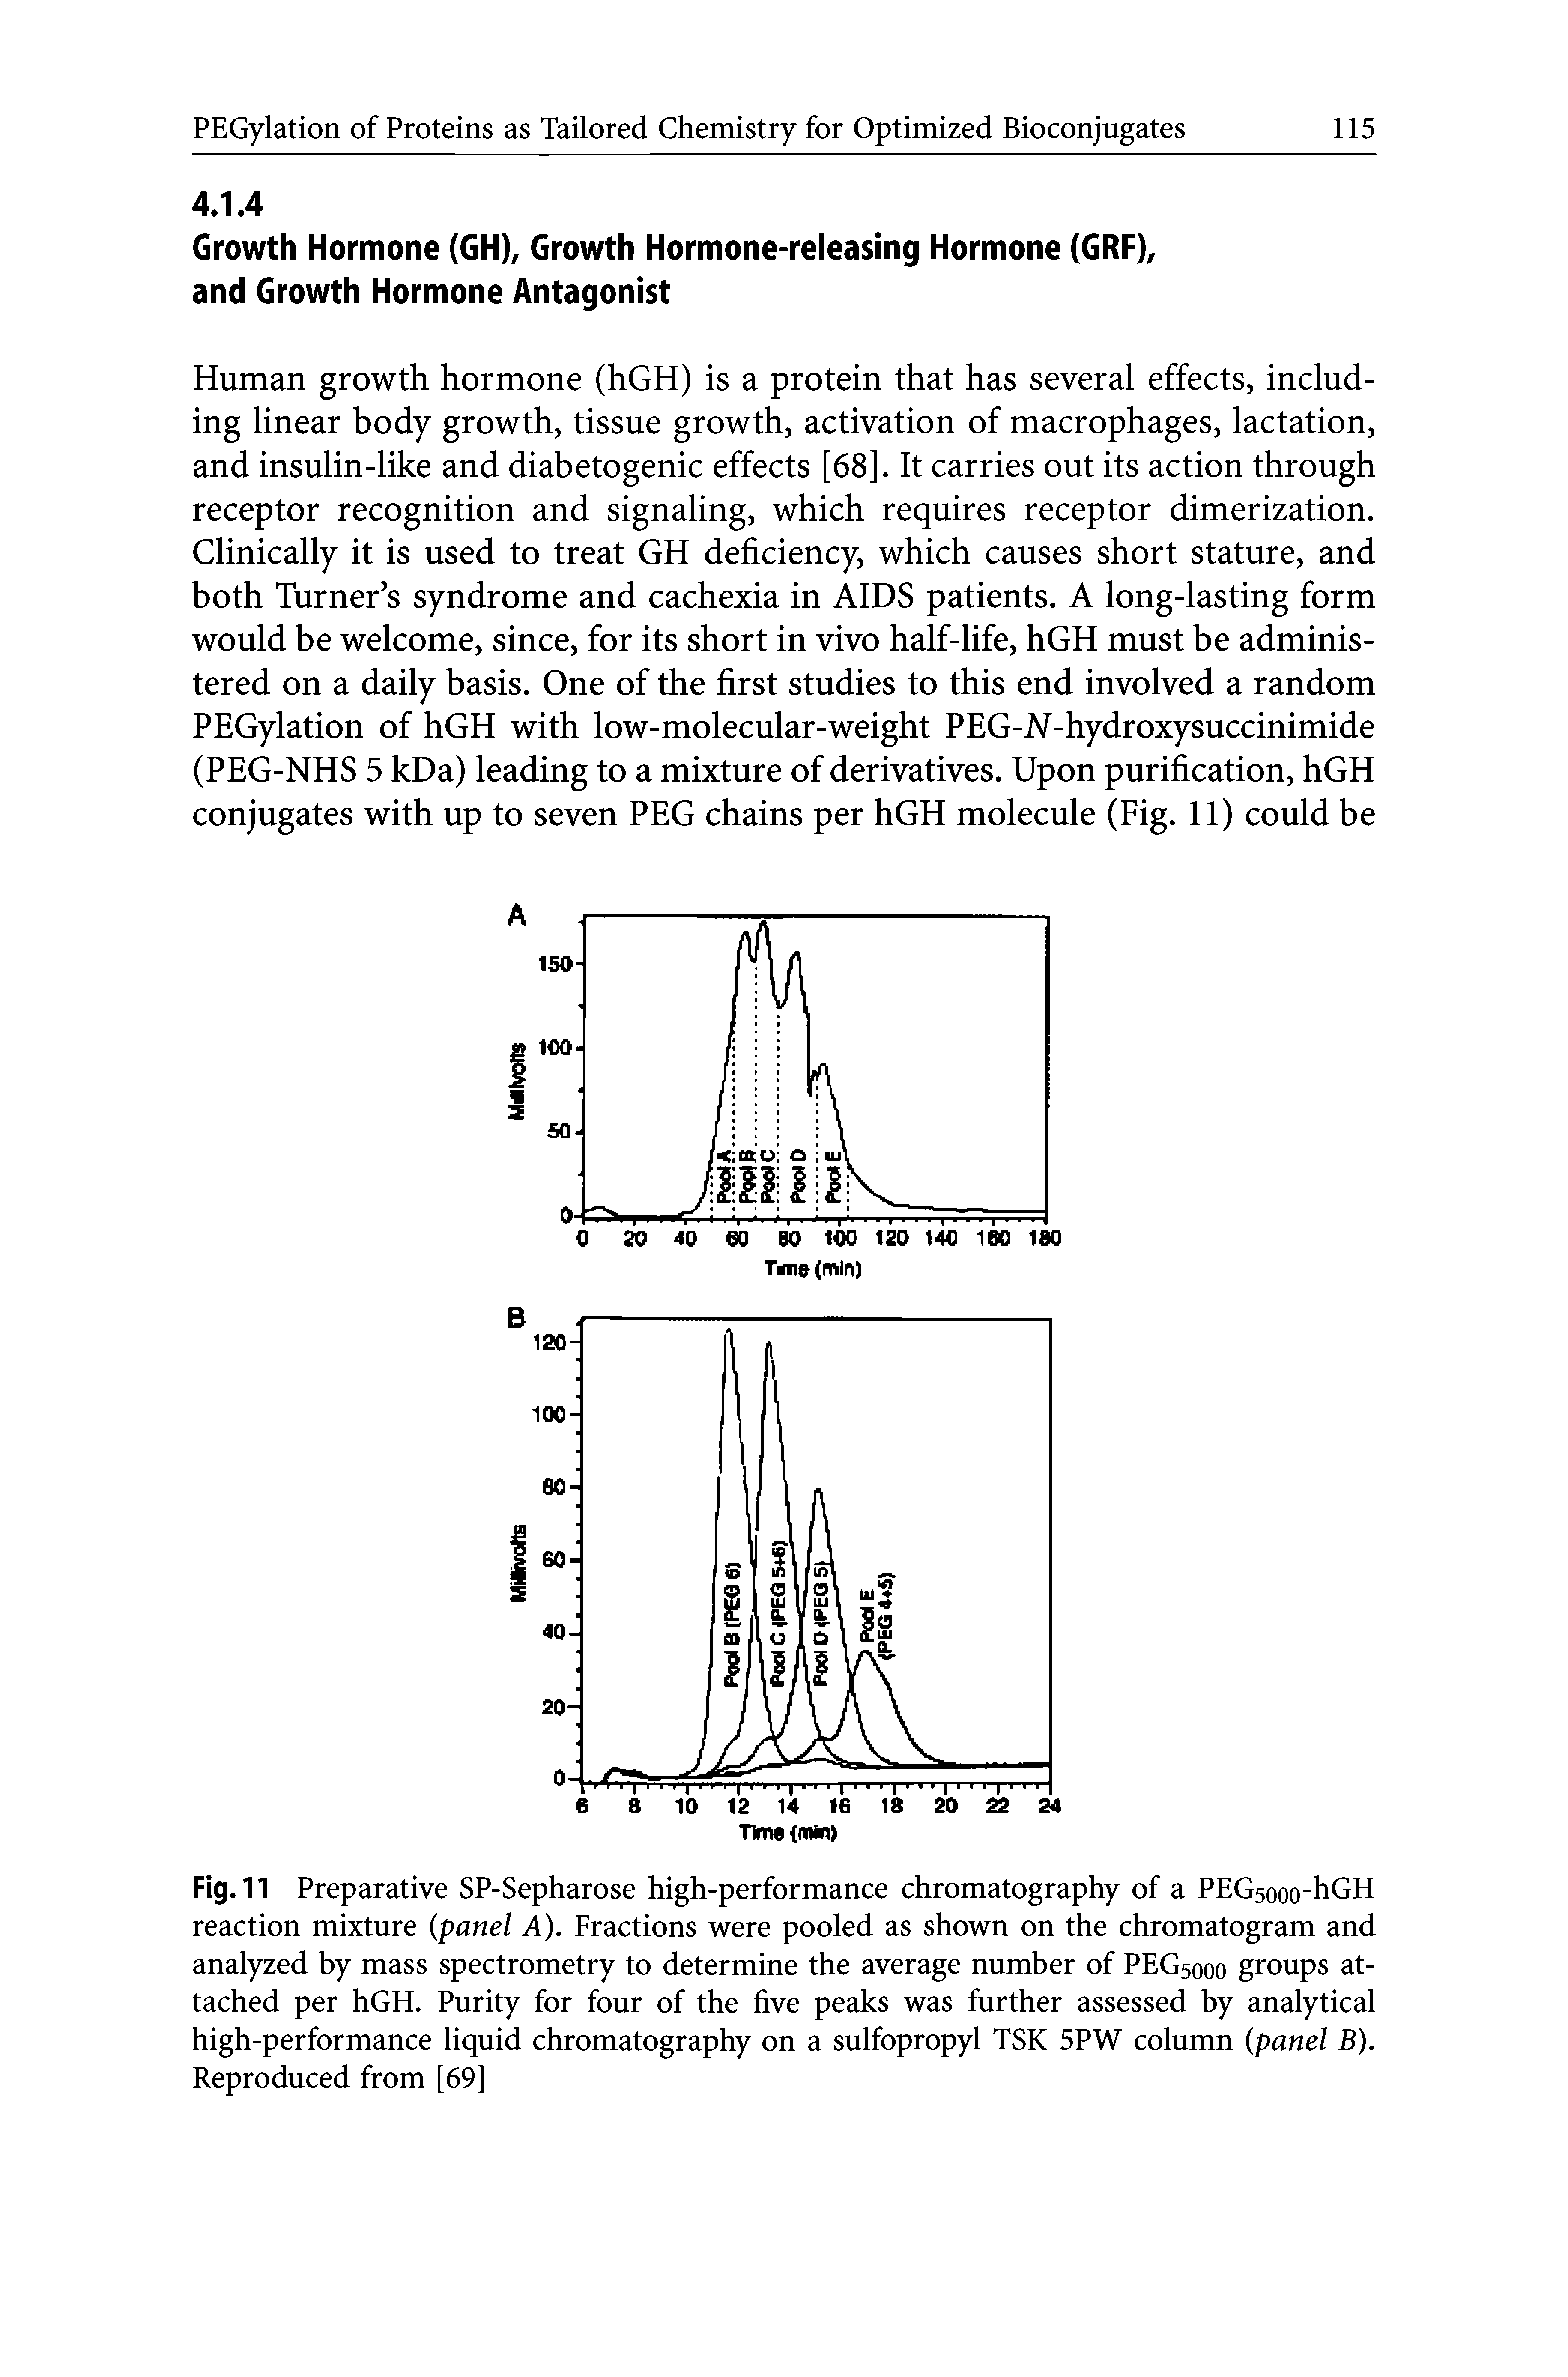 Fig. 11 Preparative SP-Sepharose high-performance chromatography of a PEGsooo-hGH reaction mixture (panel A). Fractions were pooled as shown on the chromatogram and analyzed by mass spectrometry to determine the average number of PEG5000 groups attached per hGH. Purity for four of the five peaks was further assessed by analytical high-performance liquid chromatography on a sulfopropyl TSK 5PW column (panel B). Reproduced from [69]...